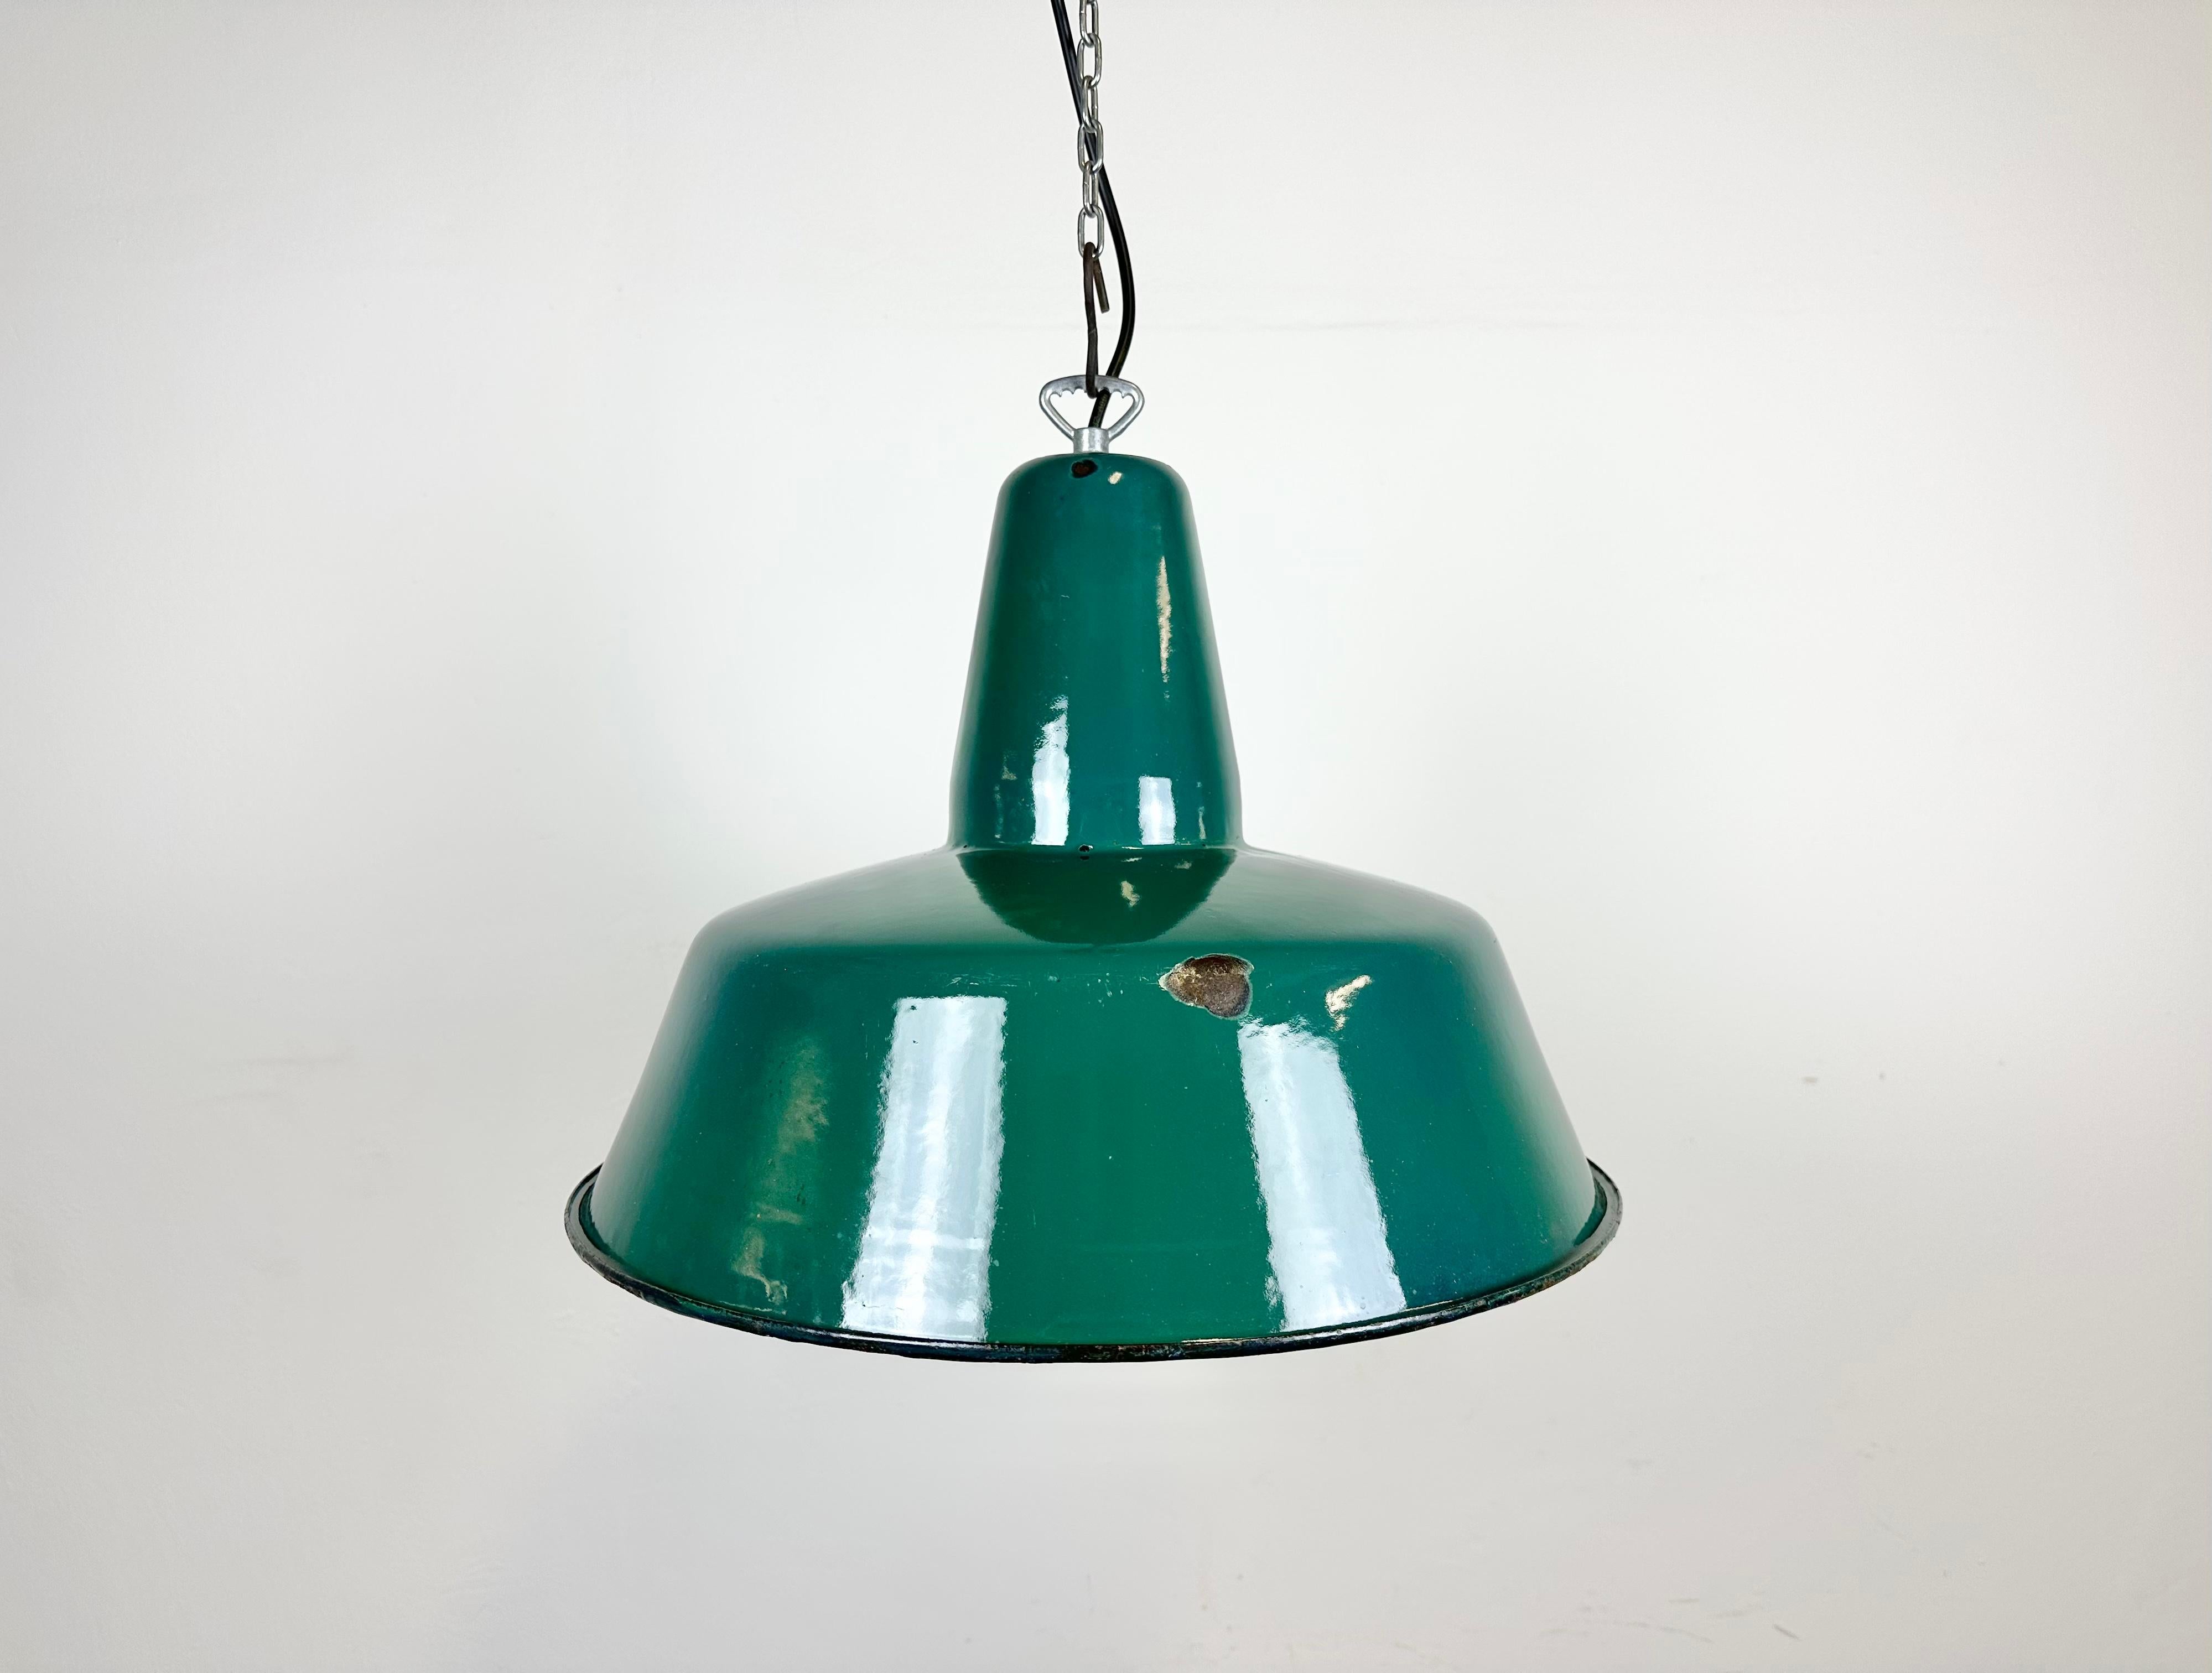 Industrial green enamel pendant light made in Poland during the 1960s. White enamel inside the shade. Iron top. The socket requires E 27/ E 26 light bulbs. New wire. Fully functional. The weight of the lamp is 2 kg.